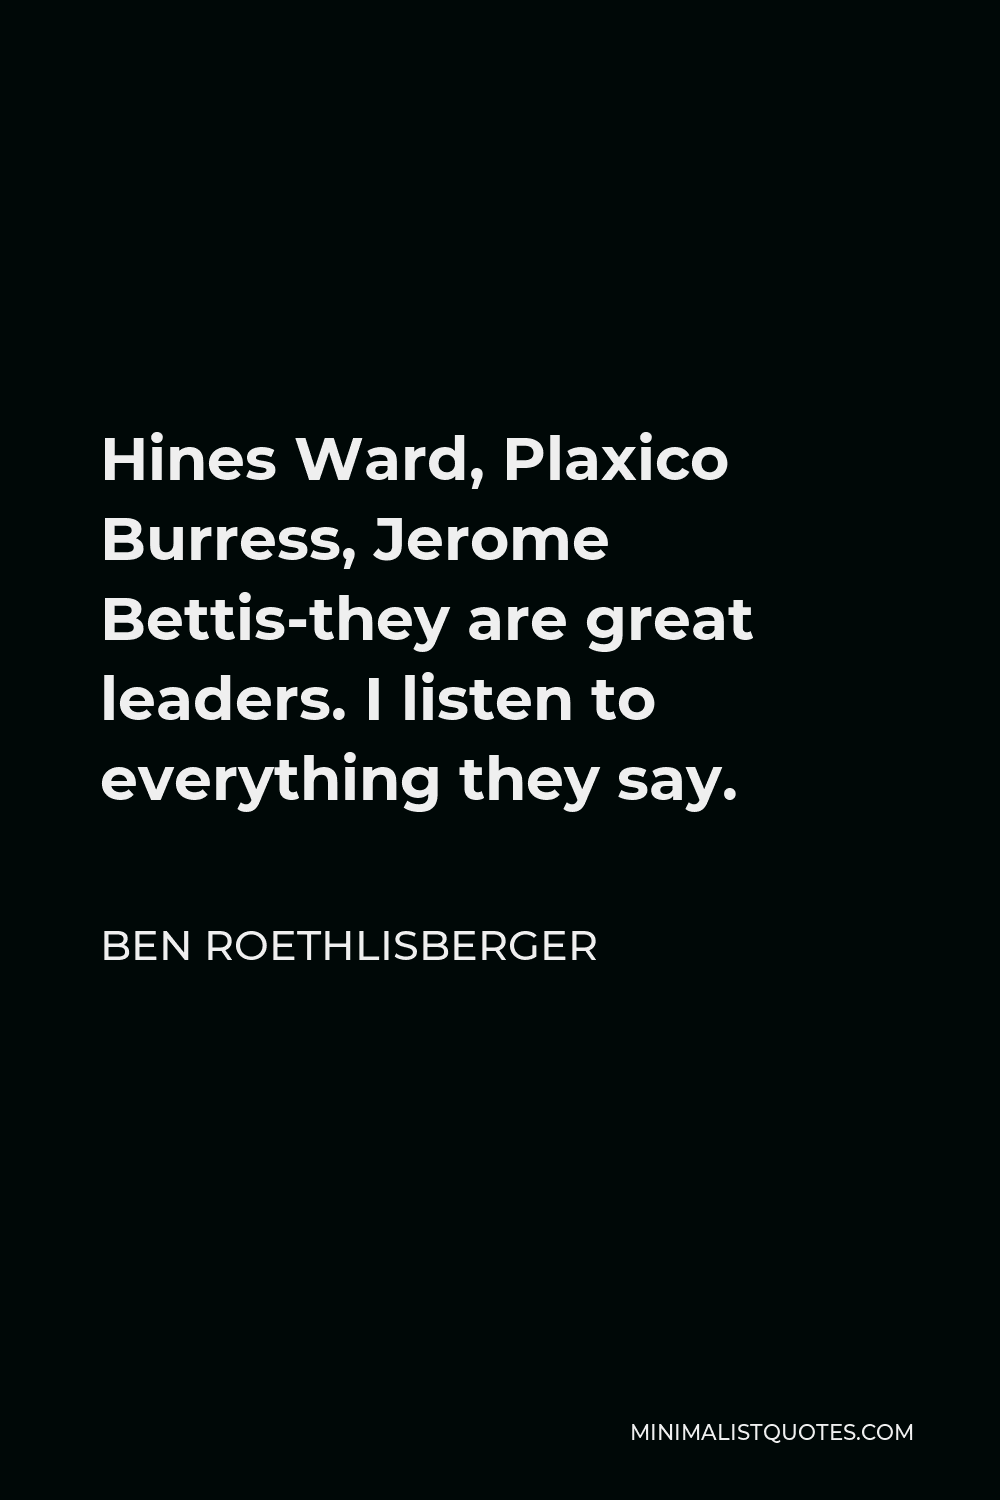 Ben Roethlisberger Quote - Hines Ward, Plaxico Burress, Jerome Bettis-they are great leaders. I listen to everything they say.